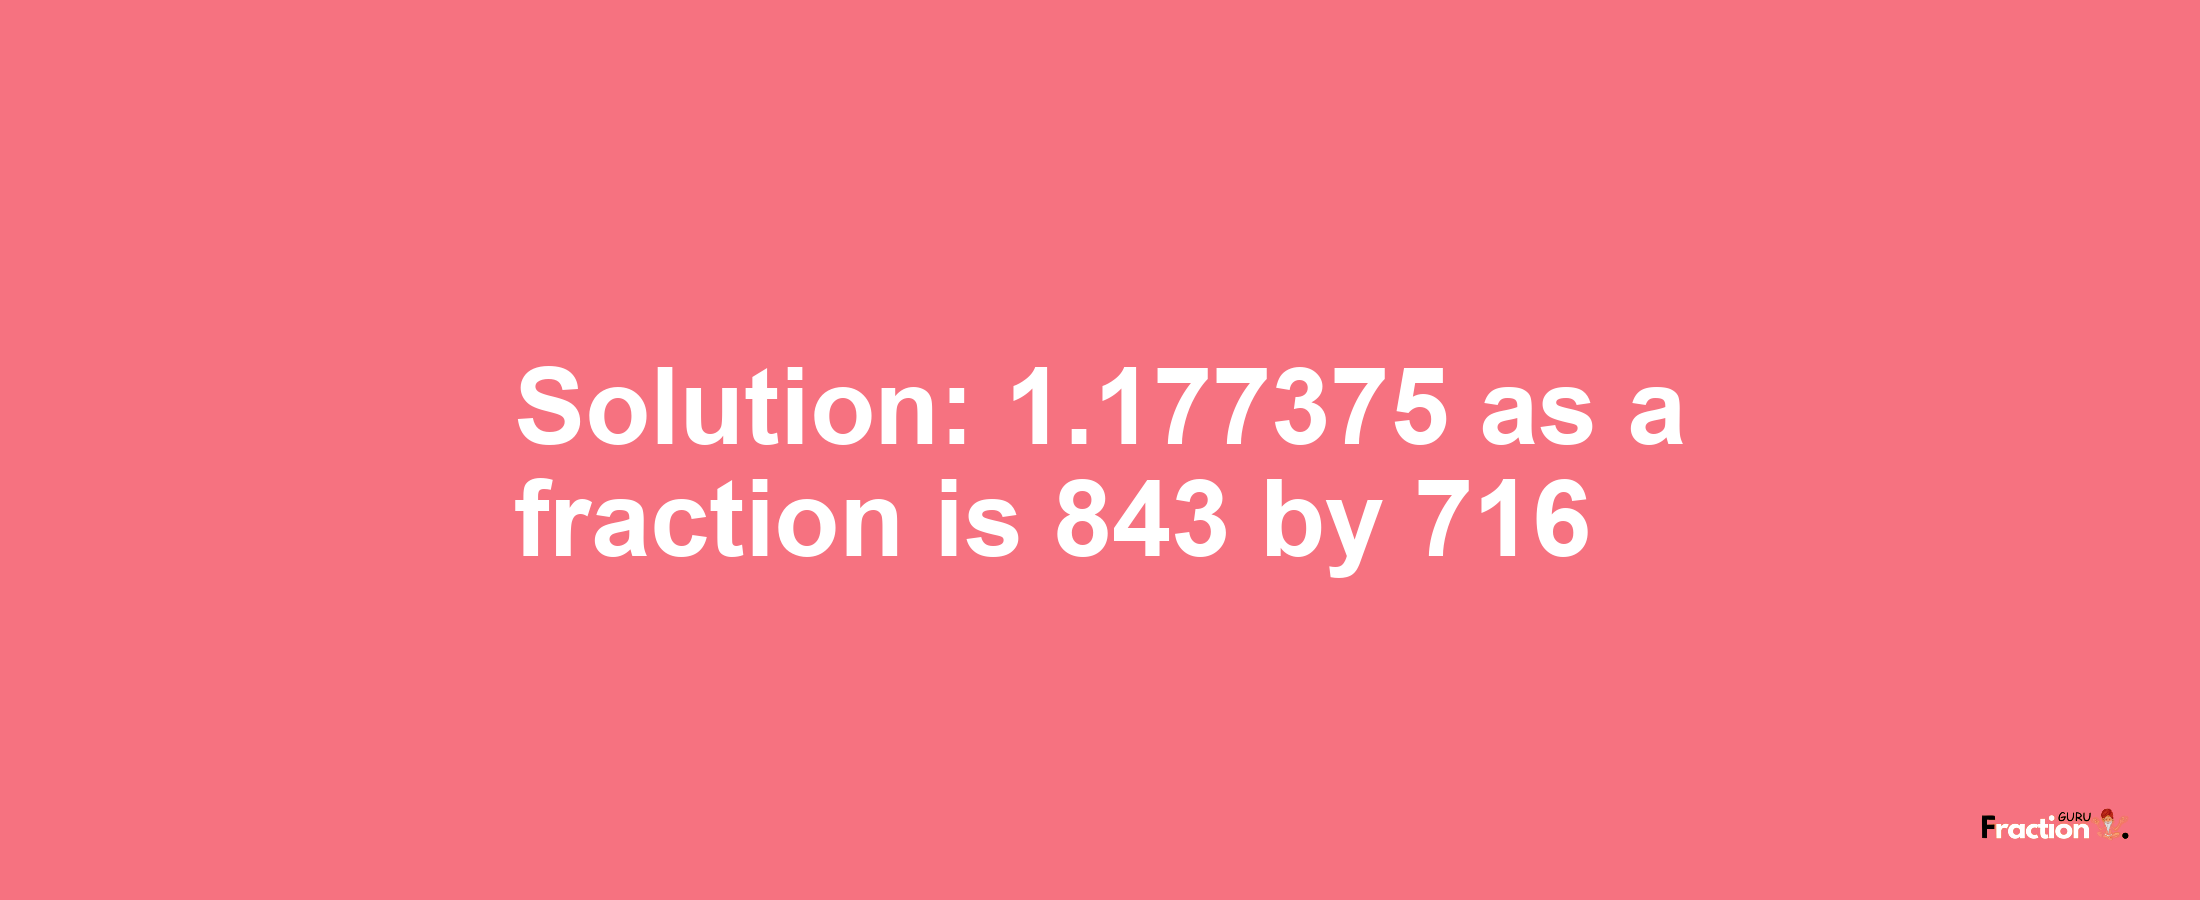 Solution:1.177375 as a fraction is 843/716